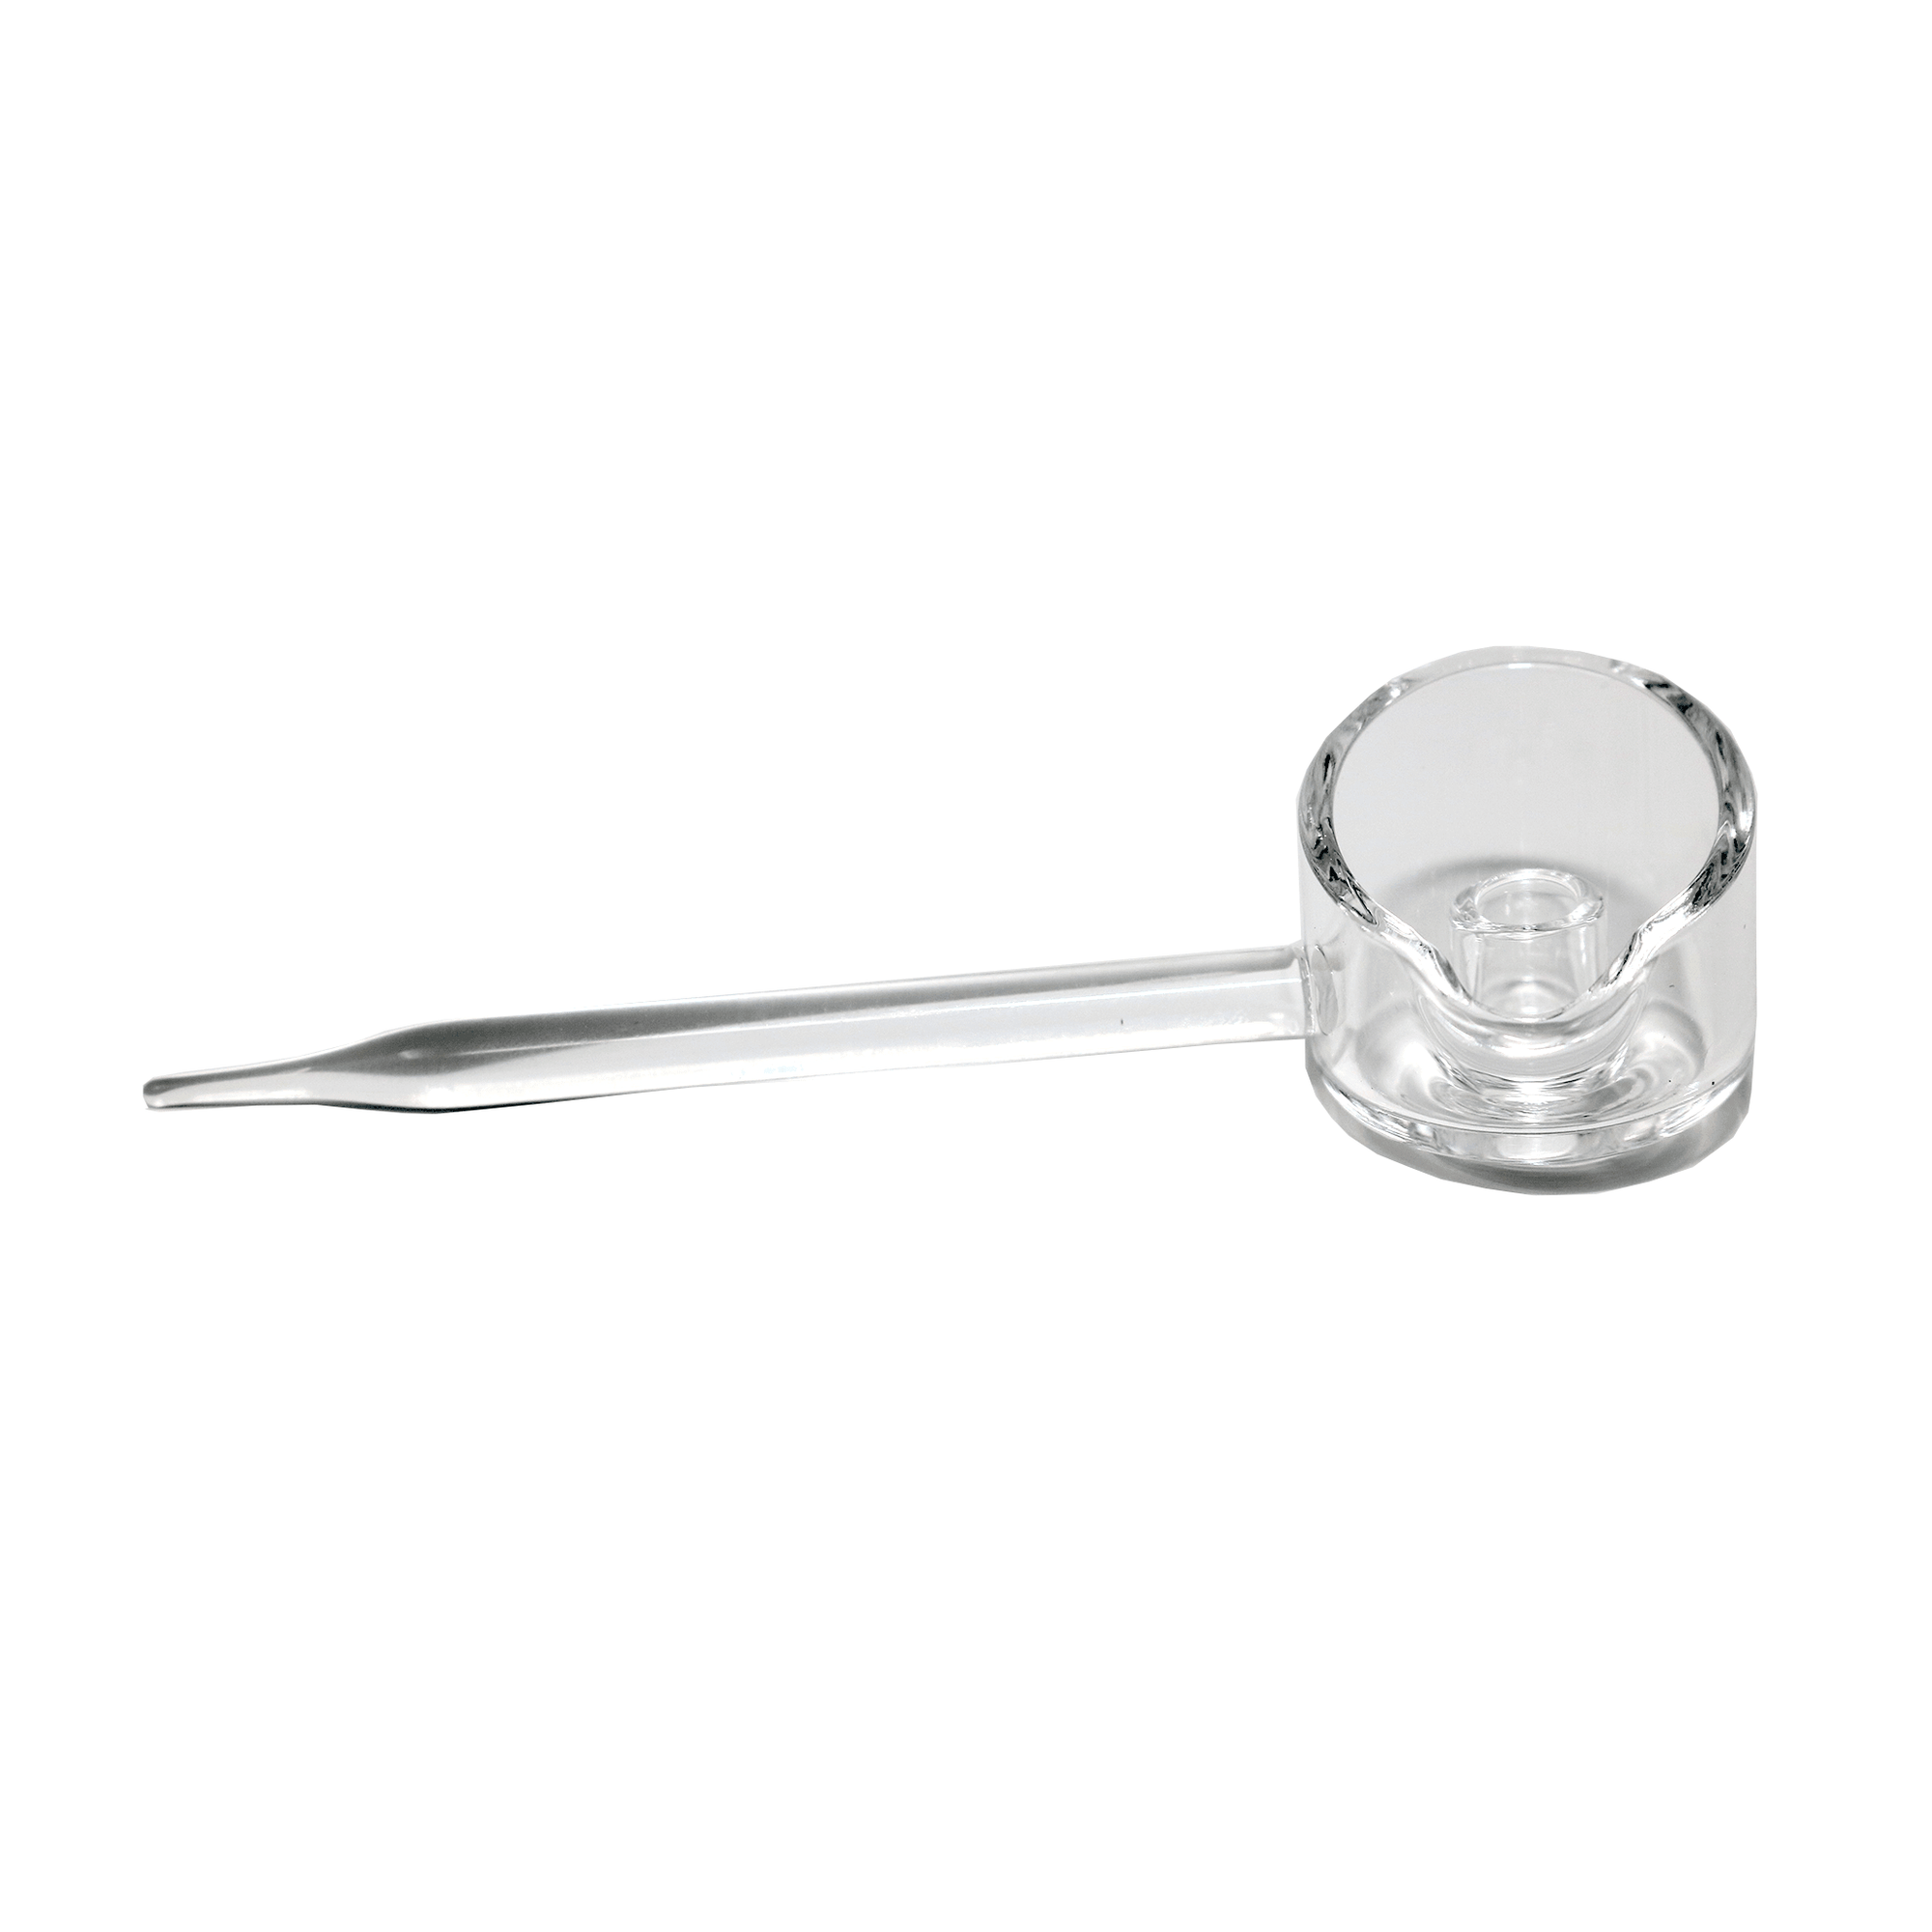 Carb Cap - Banger Cap with Dabber | Side View | the dabbing specialists